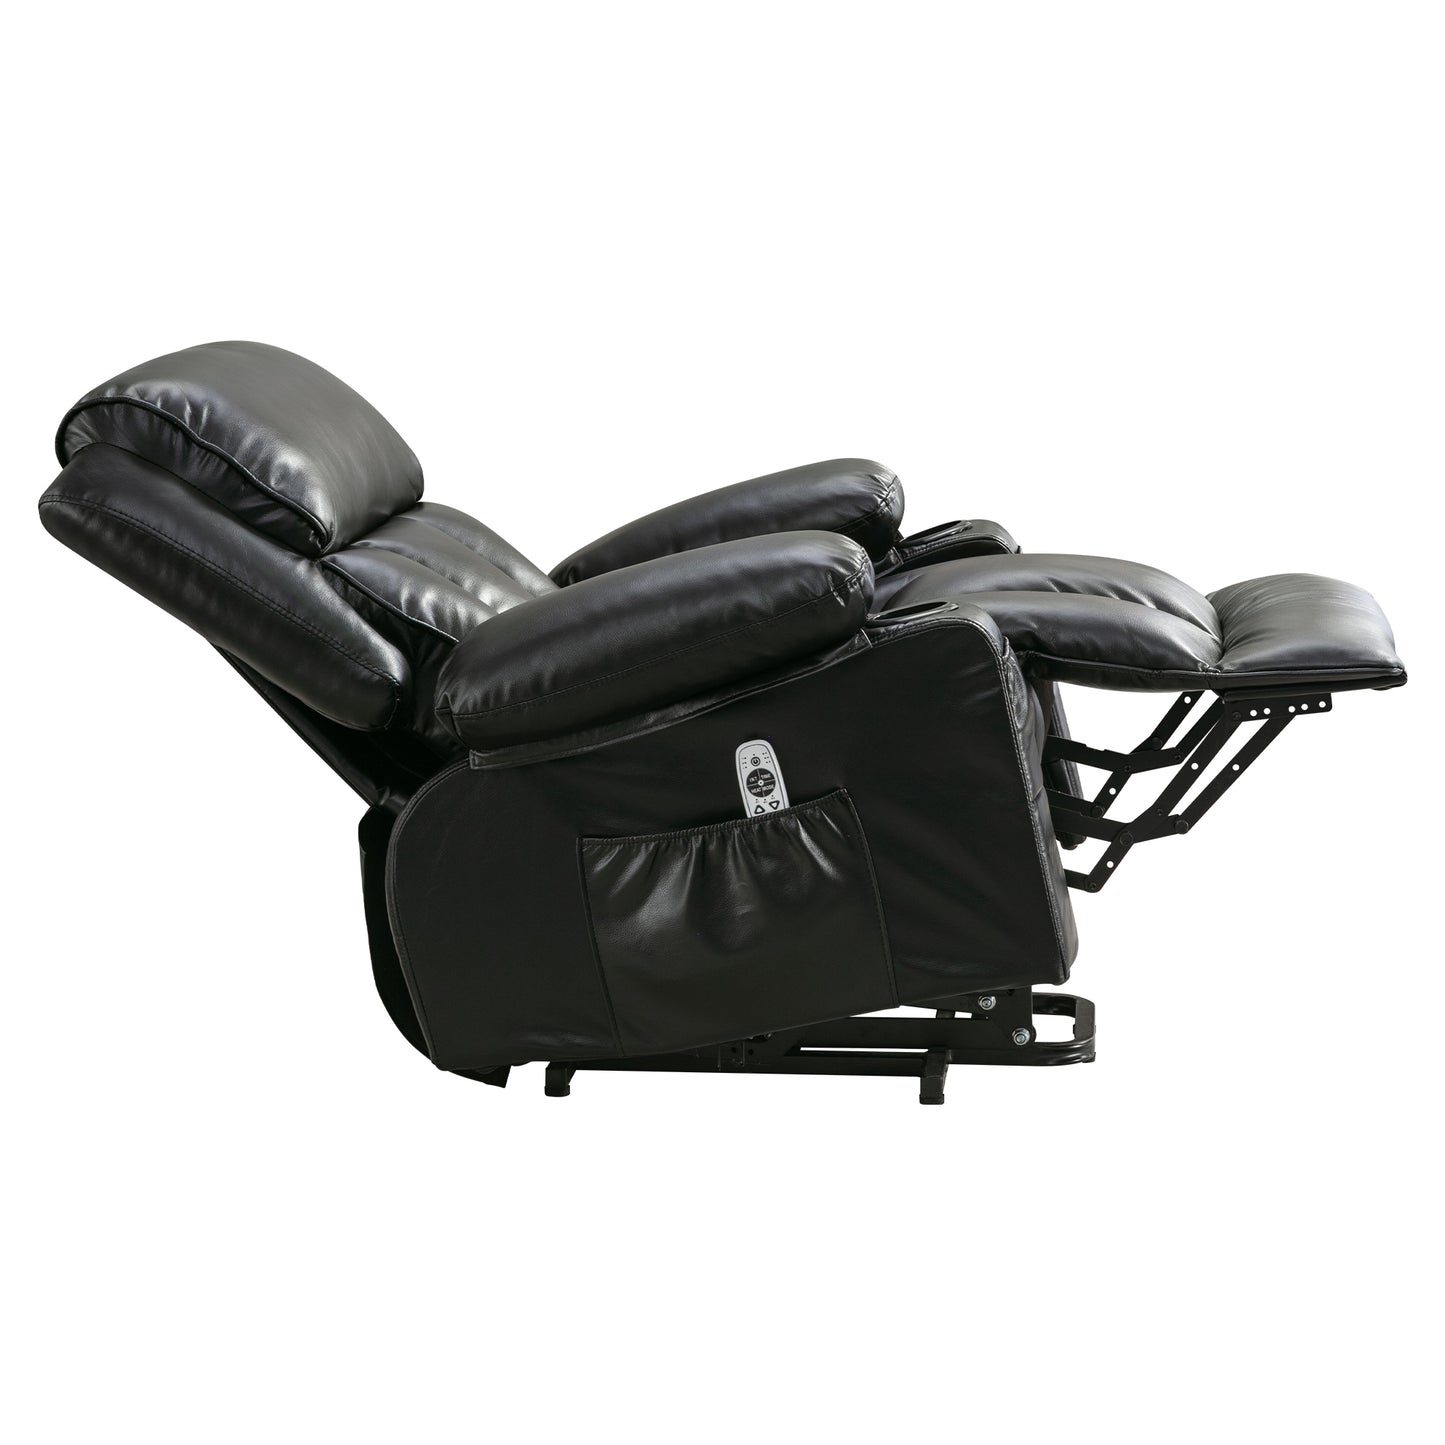 ComfortEase Ultra: The Ultimate Lift & Wellness Recliner with Heat, Massage, and Smart Features: BLACK